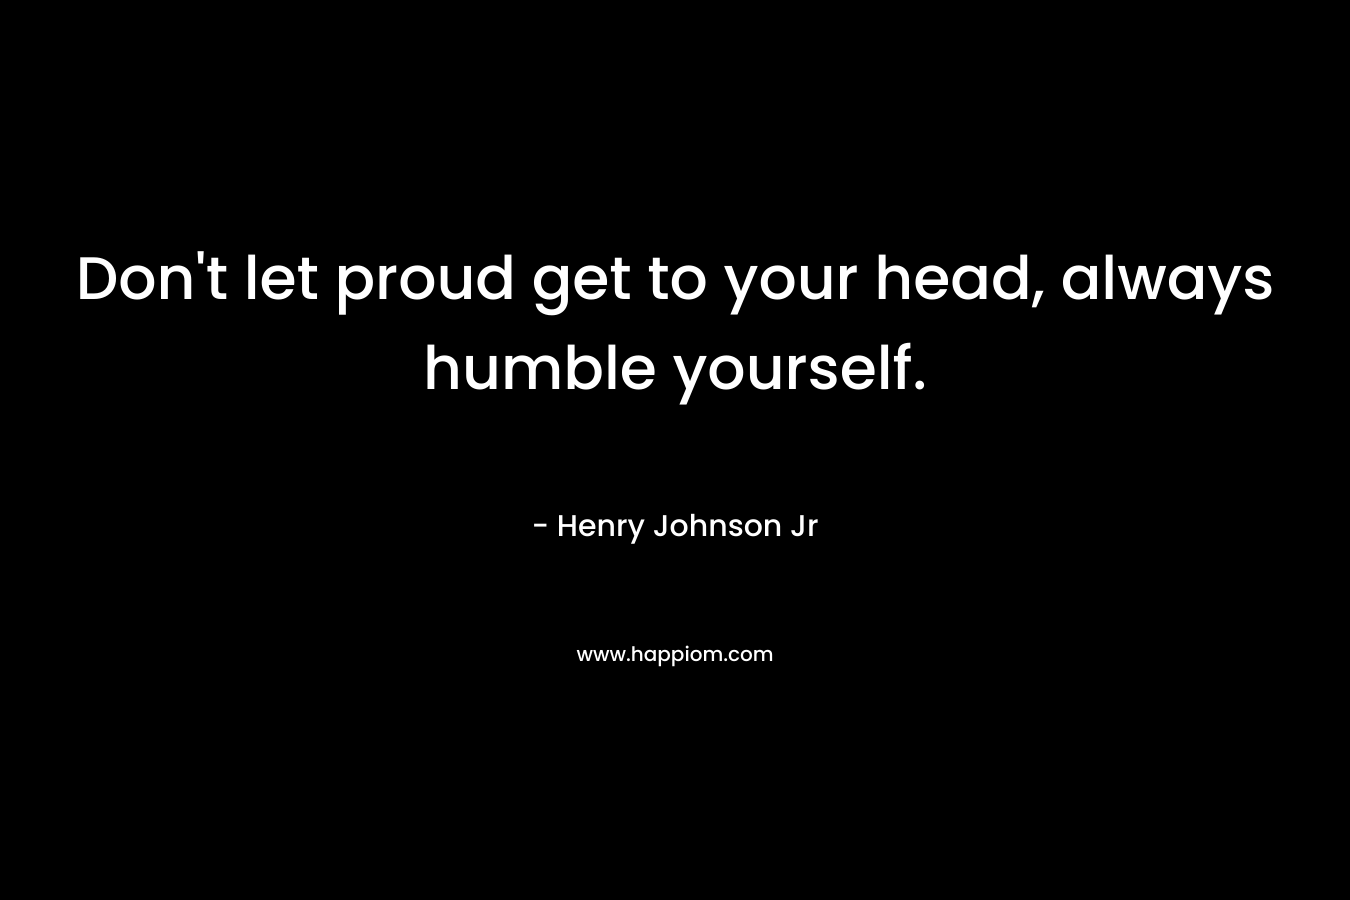 Don’t let proud get to your head, always humble yourself. – Henry Johnson Jr